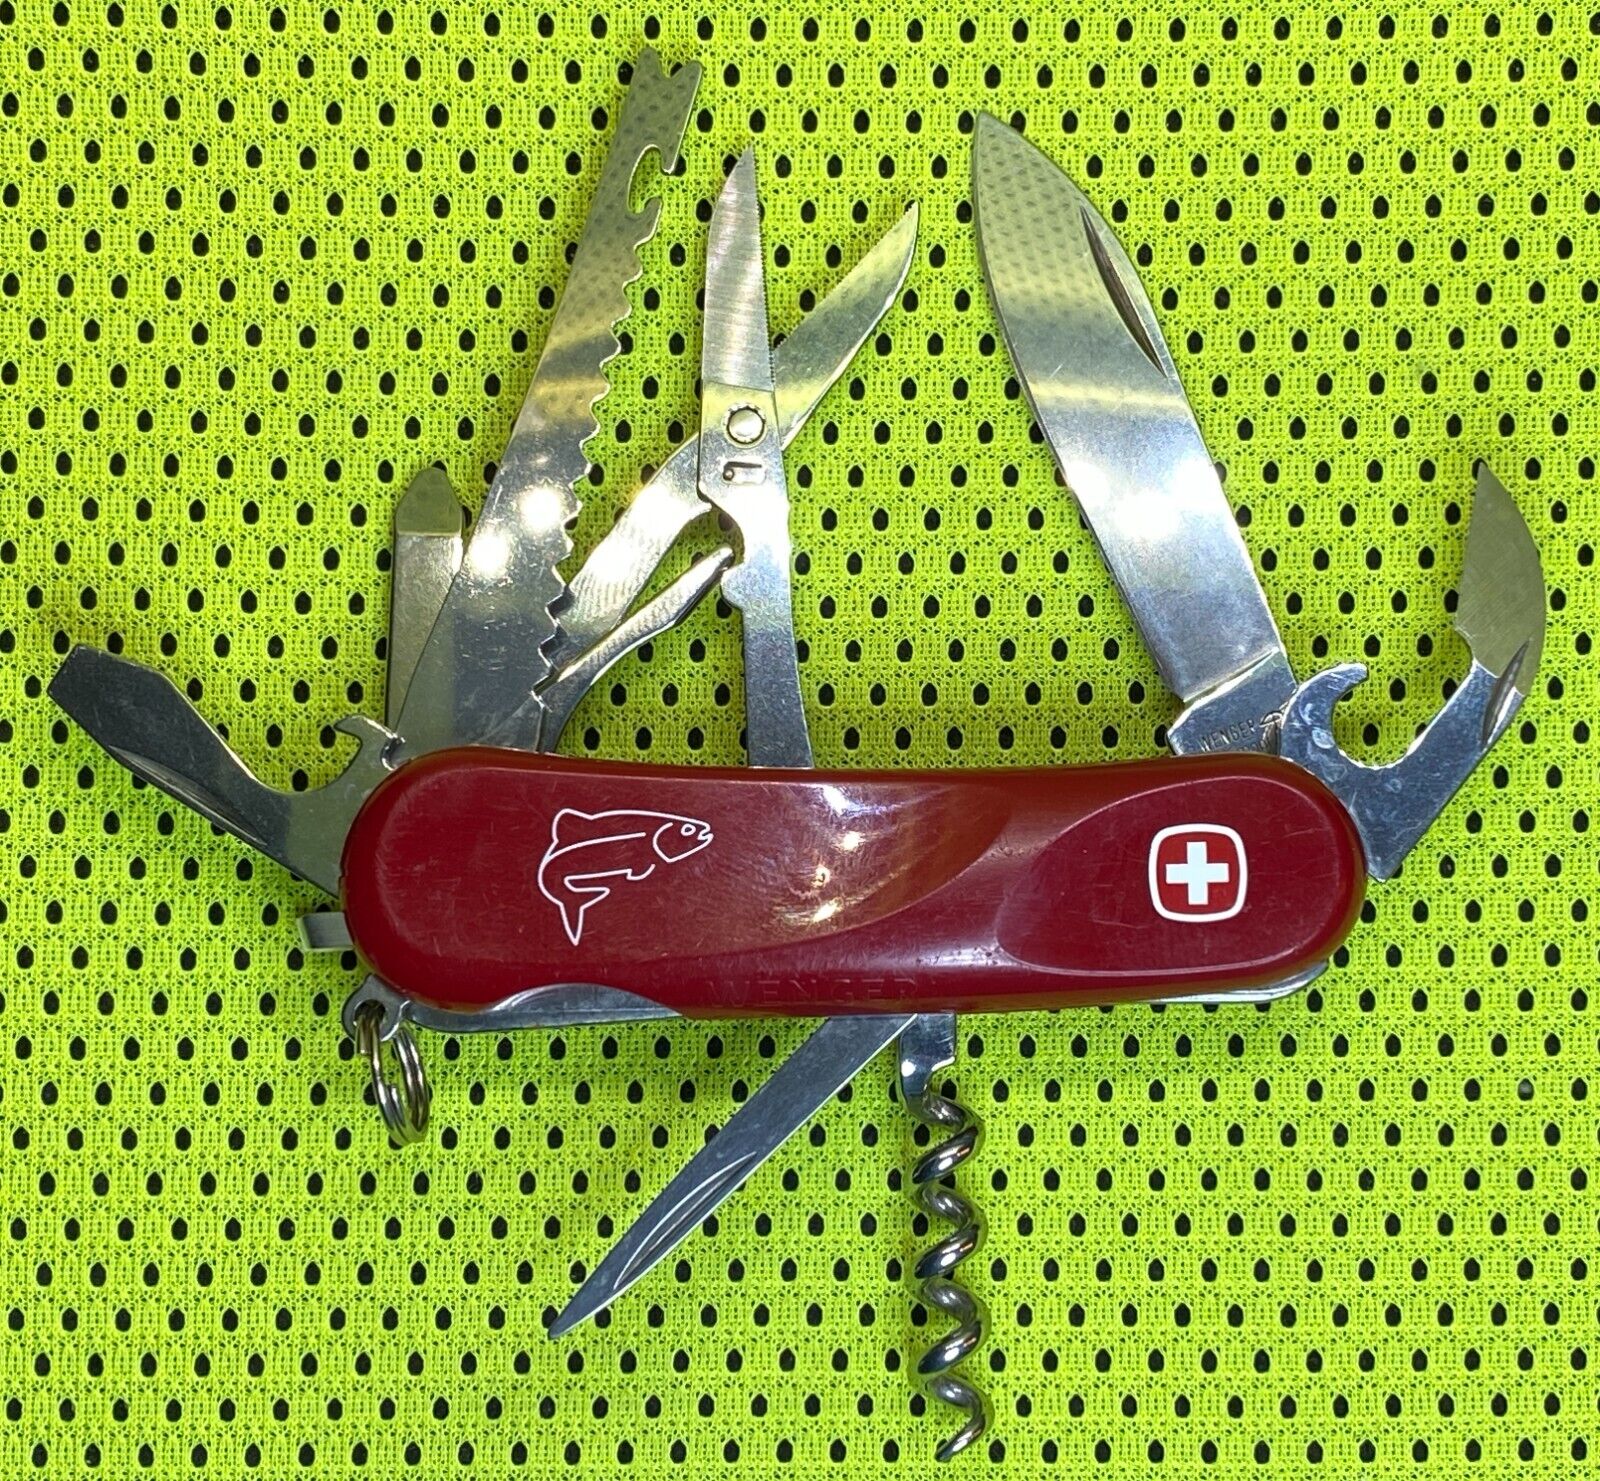 Wenger Fisherman Evolution Evo 19 Red 85mm 4 Layer Swiss Army Knife Used (491)